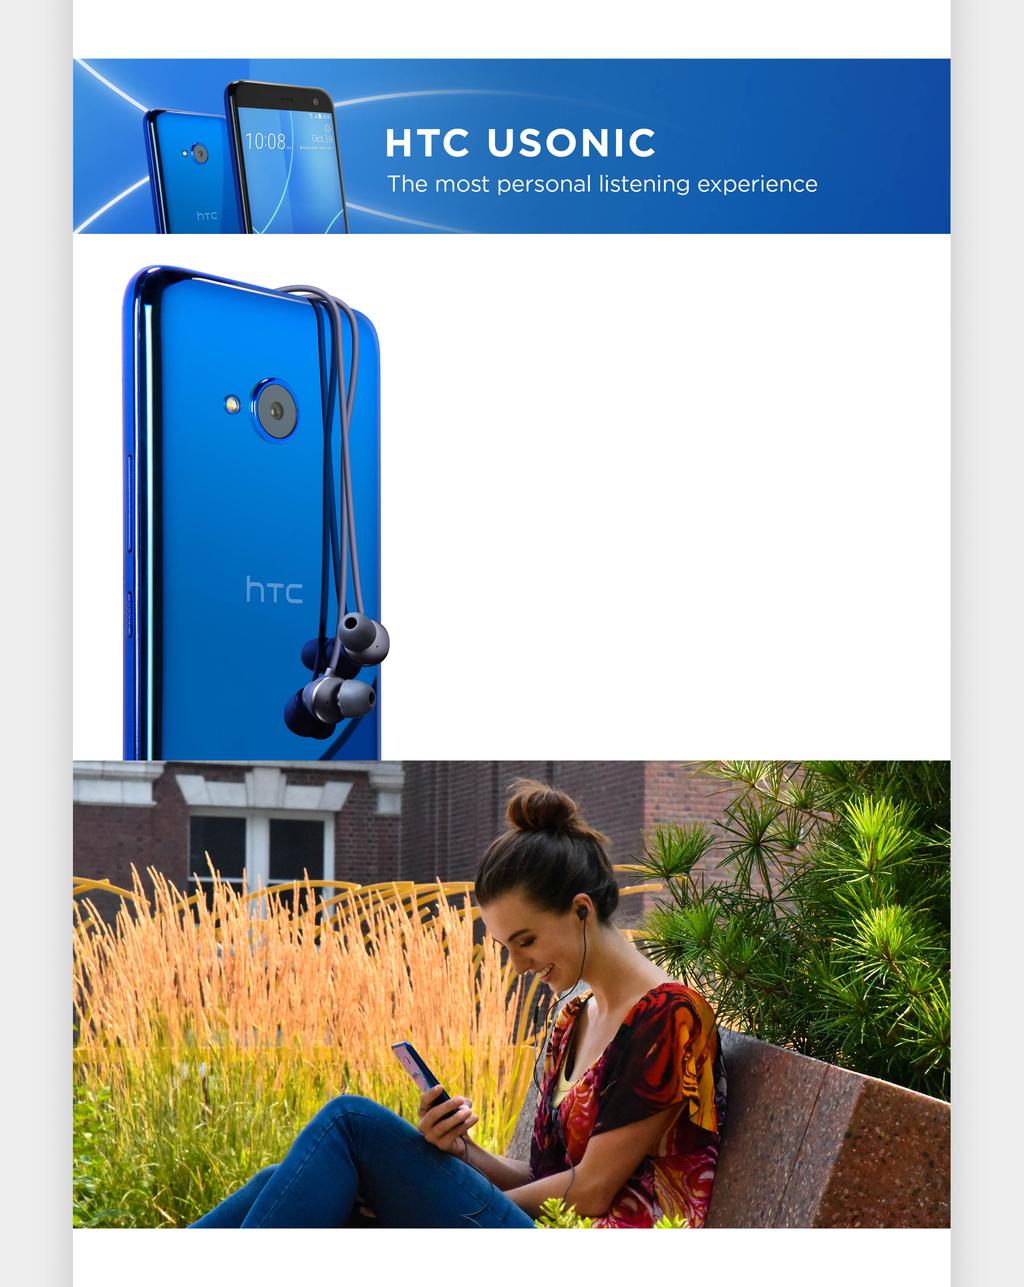 HTC USonic With the same experience as the flagship HTC U11, HTC USonic provides automatic Active Noise Cancellation, Hi- Res Audio certified 24-bit sound quality, and the ability to tune audio to